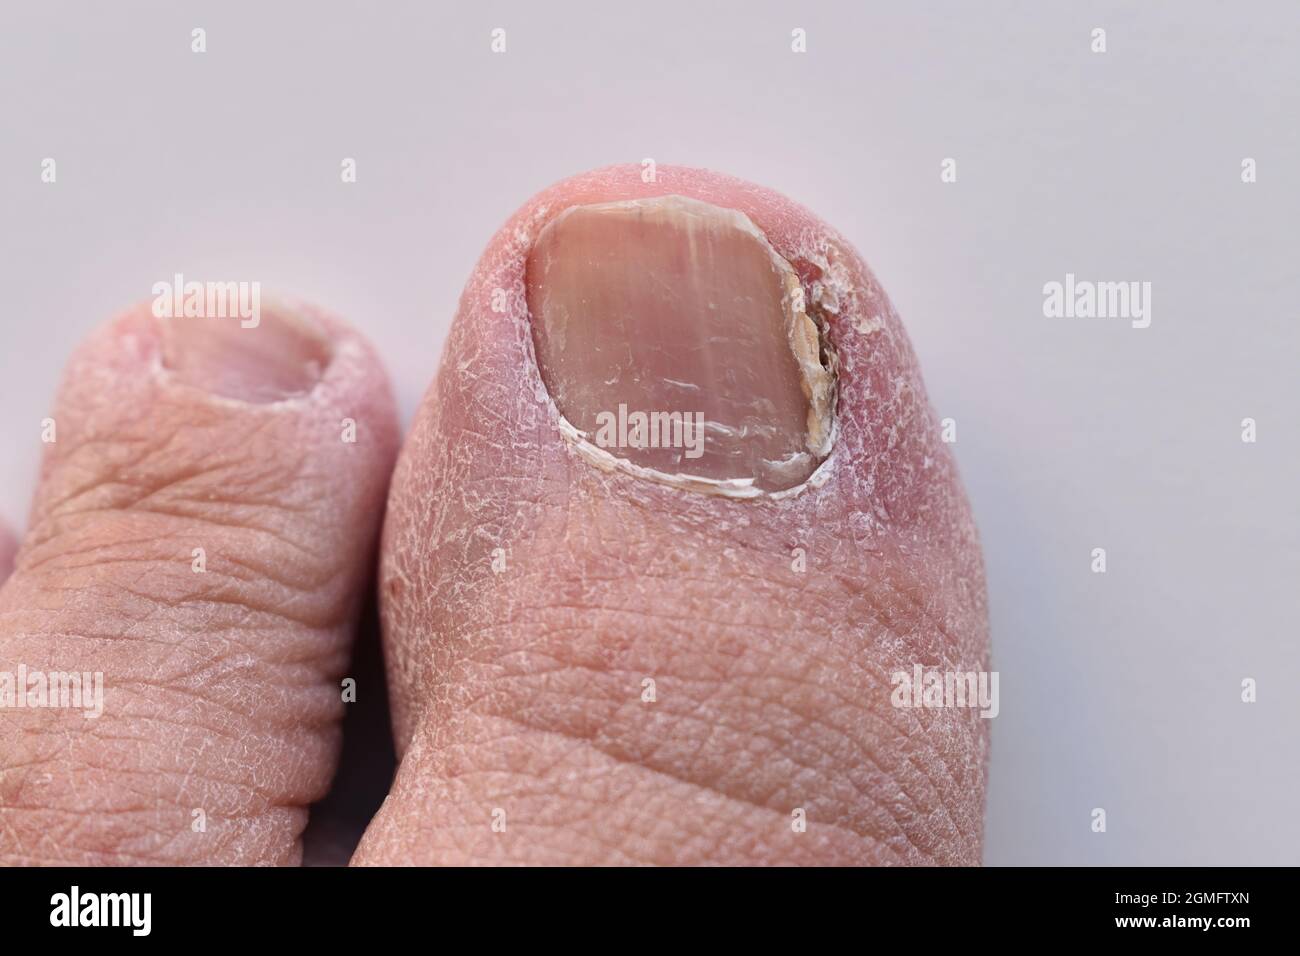 Nail fungus infection, onychomycosis, on foot thumb. Fungal infection on nail foot. Stock Photo